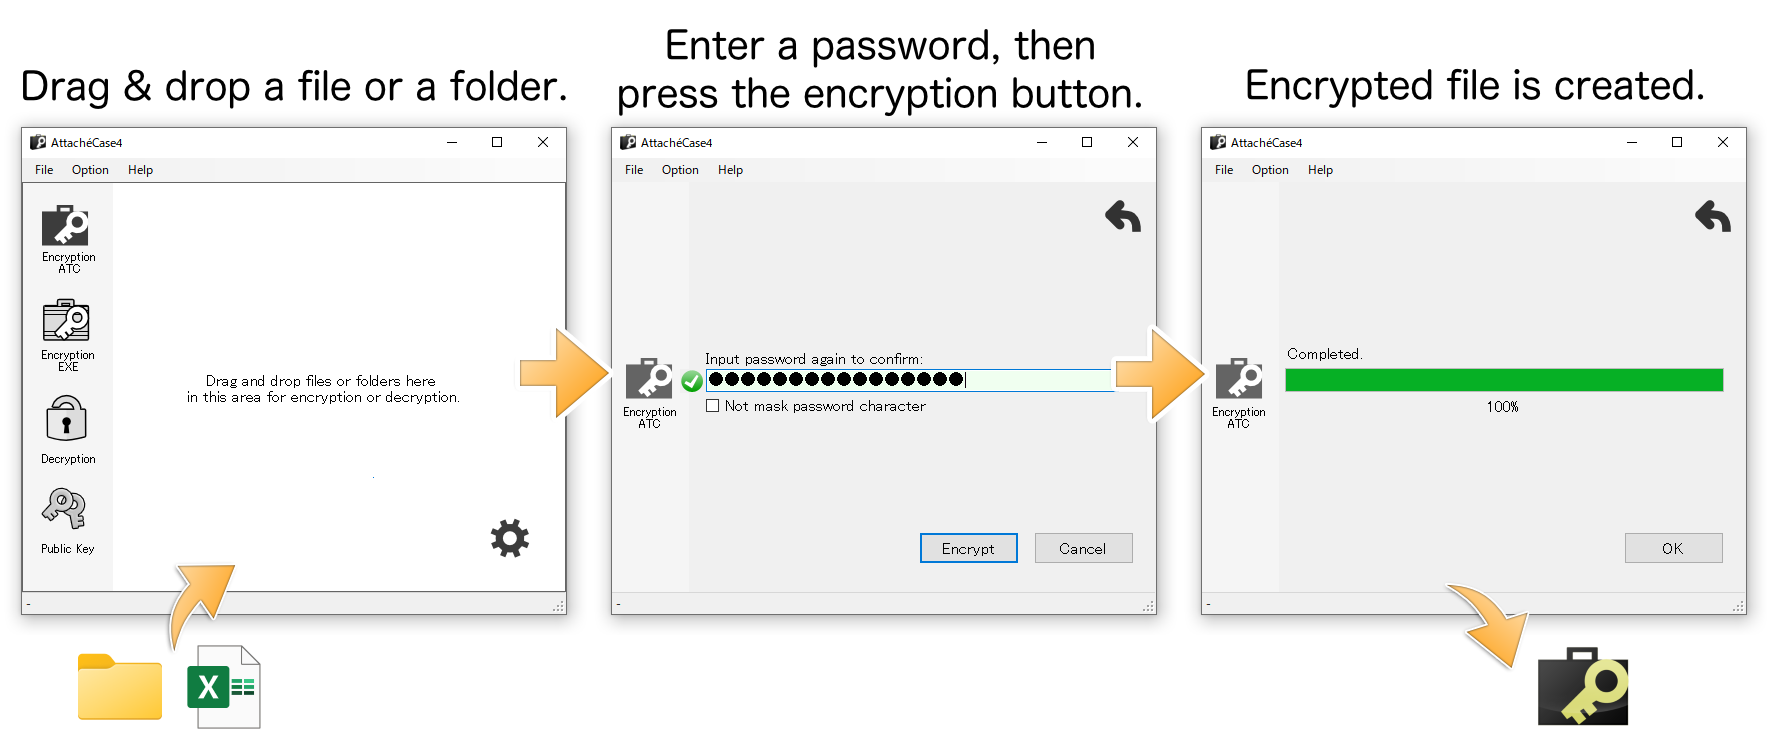 File encryption in just 3 steps